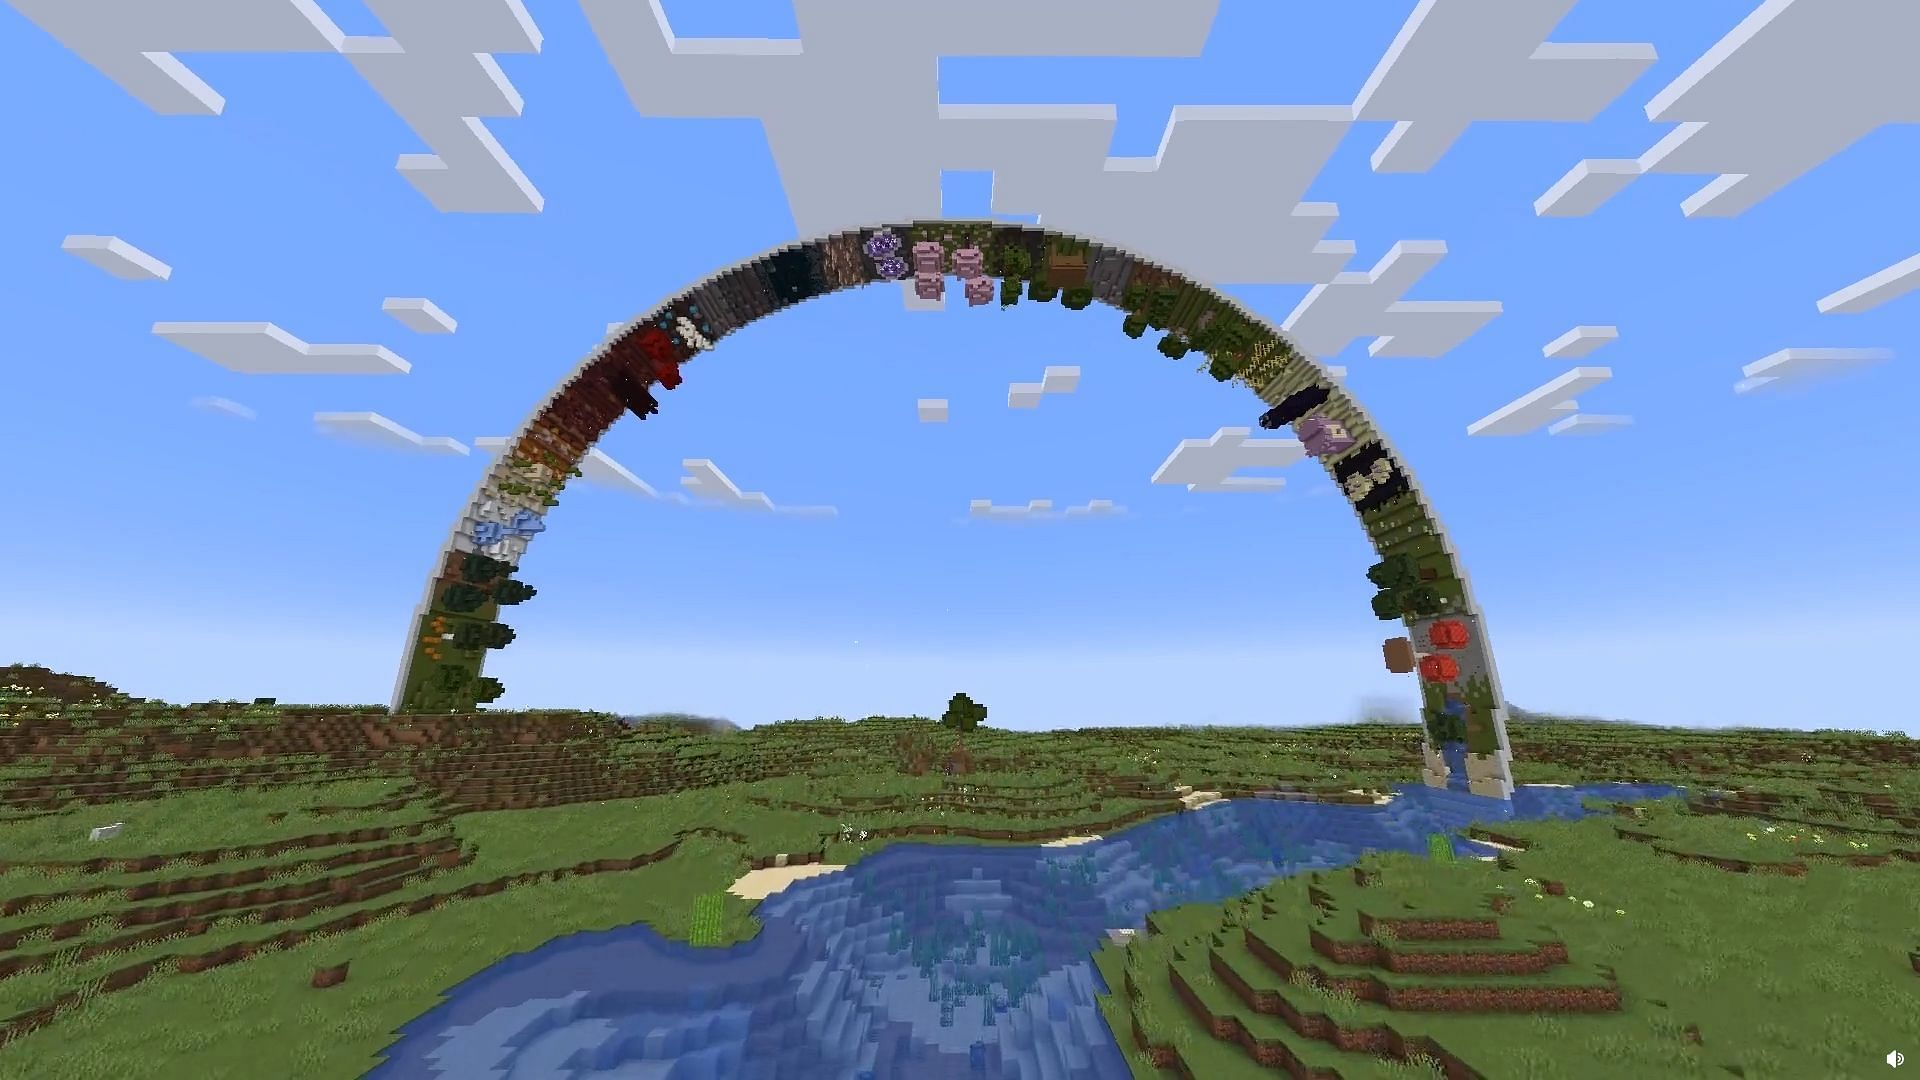 Minecraft player creates a ring made of different biomes (Image via Reddit/u/Colbrow)